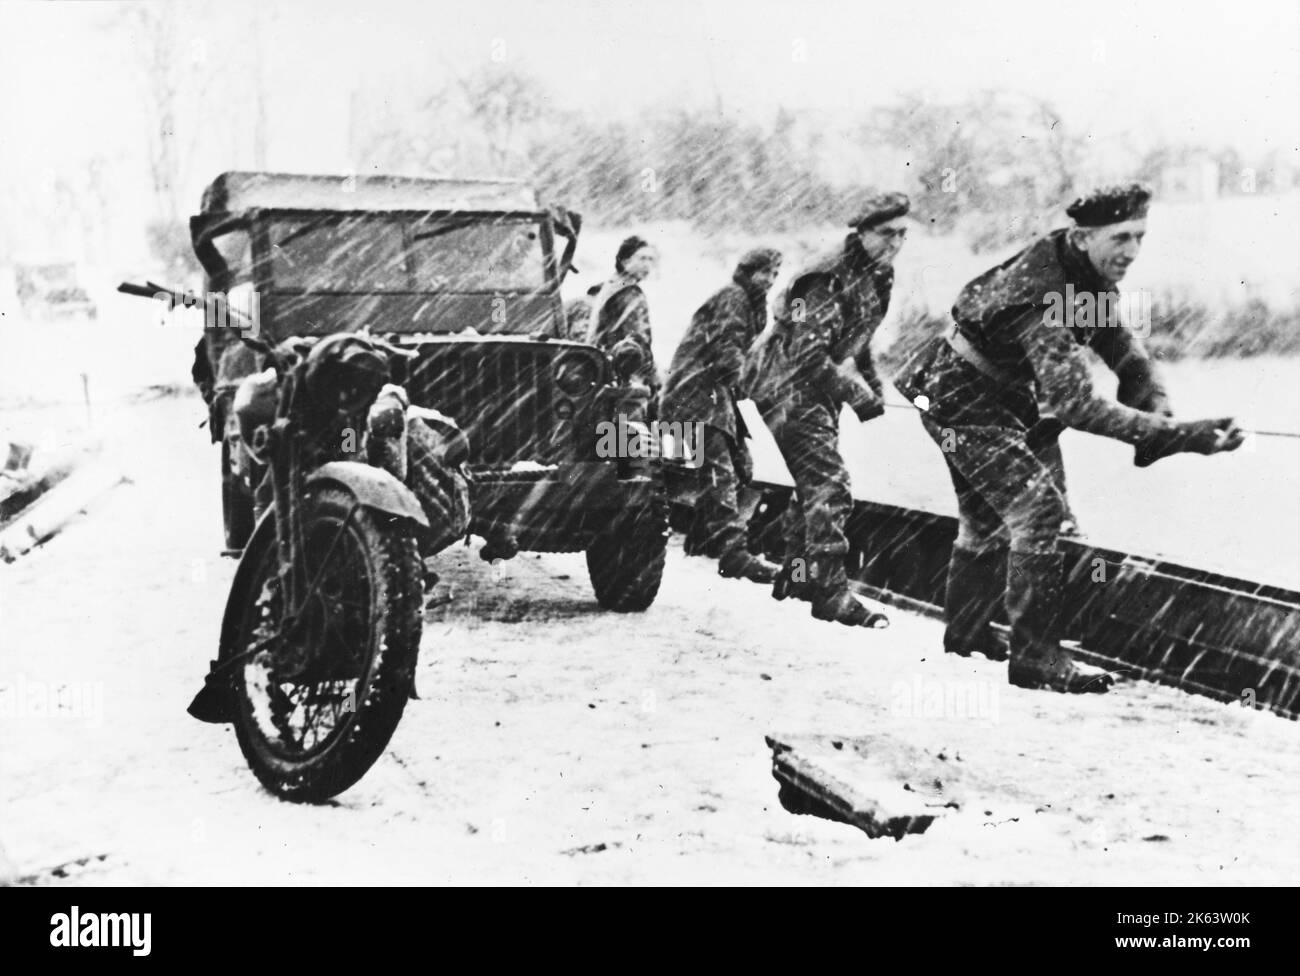 Polish soldiers crossing a river while towing a Jeep in bad weather on the Western Front during World War II. The Allied forces had to not only deal with the enemy but also the cold and the snow. Stock Photo